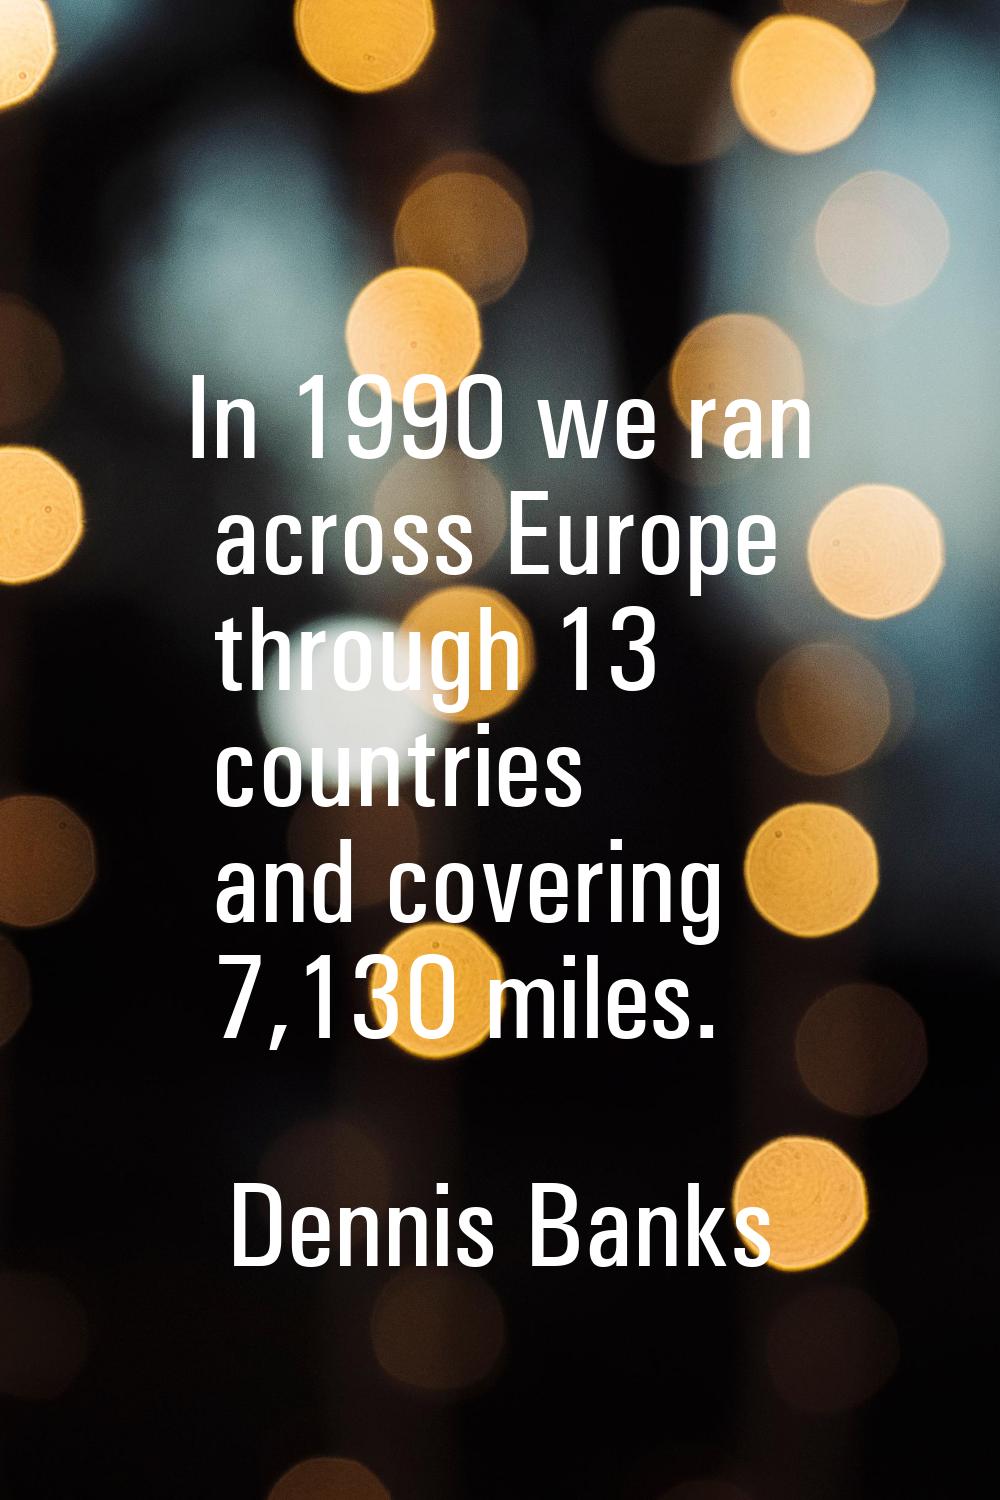 In 1990 we ran across Europe through 13 countries and covering 7,130 miles.